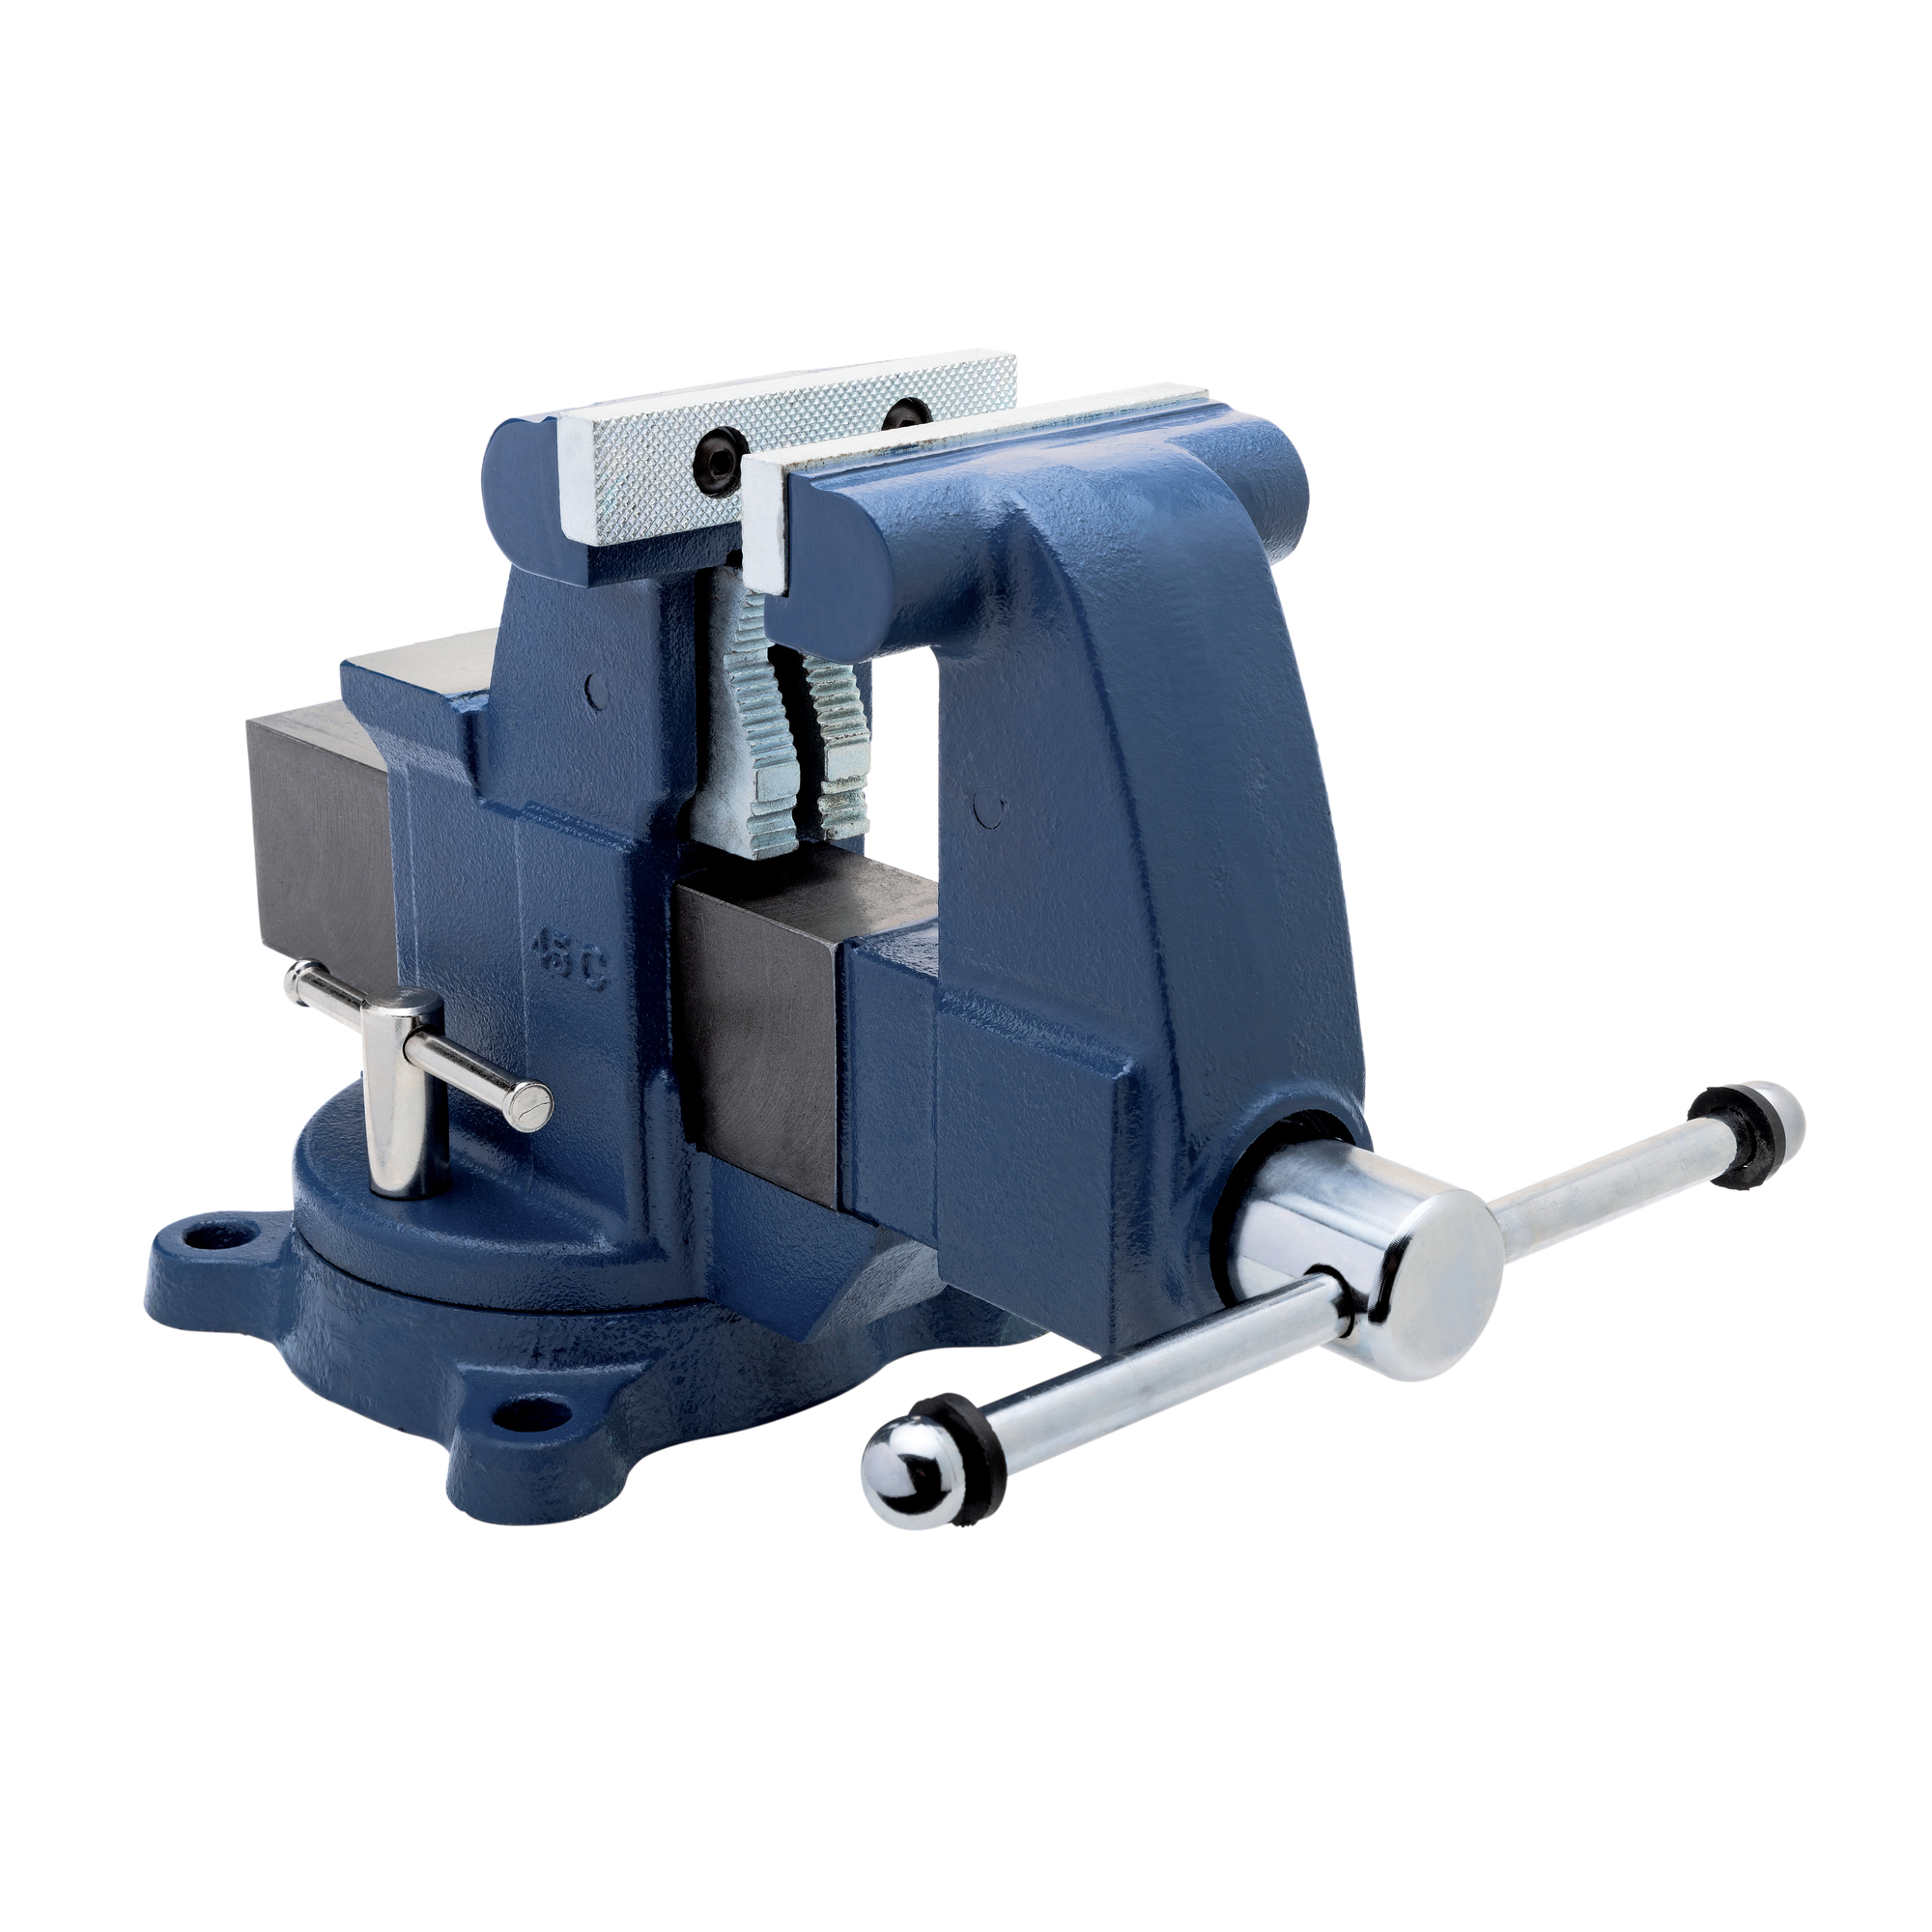 Yost Vises, 4.5Inch Tradesman Combo Vise, Jaw Width 4.5 in, Jaw Capacity 4.5 in, Material Ductile Iron, Model 45C